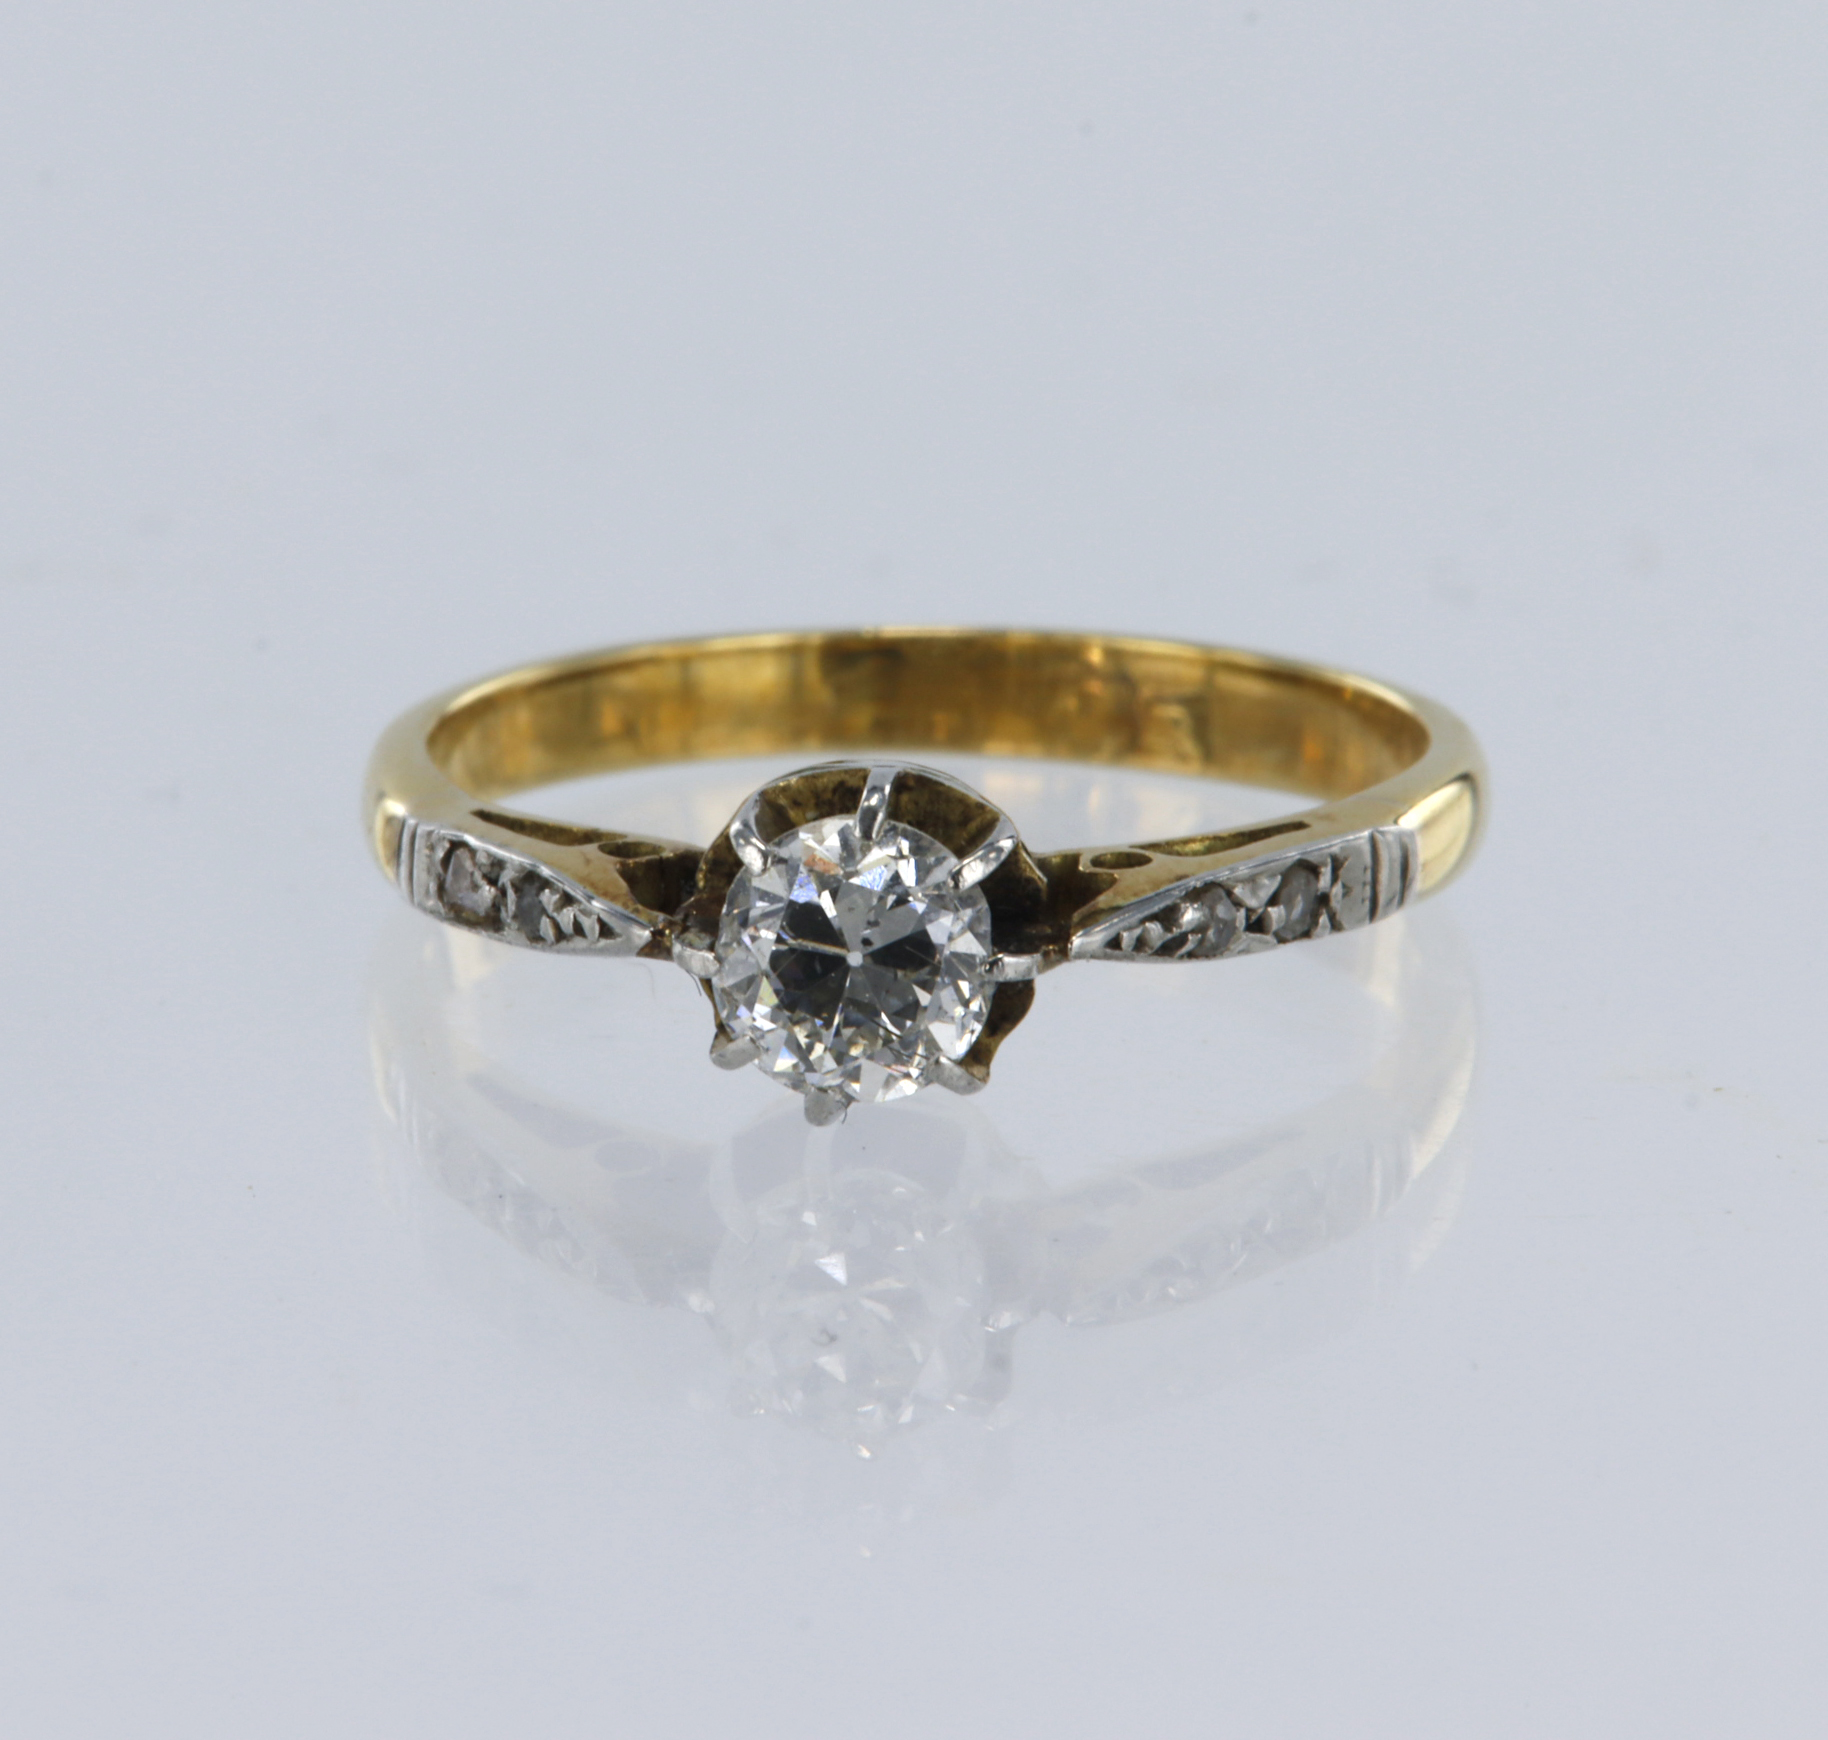 Yellow metal tests 18ct, diamond soliatire with supporting diamond shoulders, principle old cut